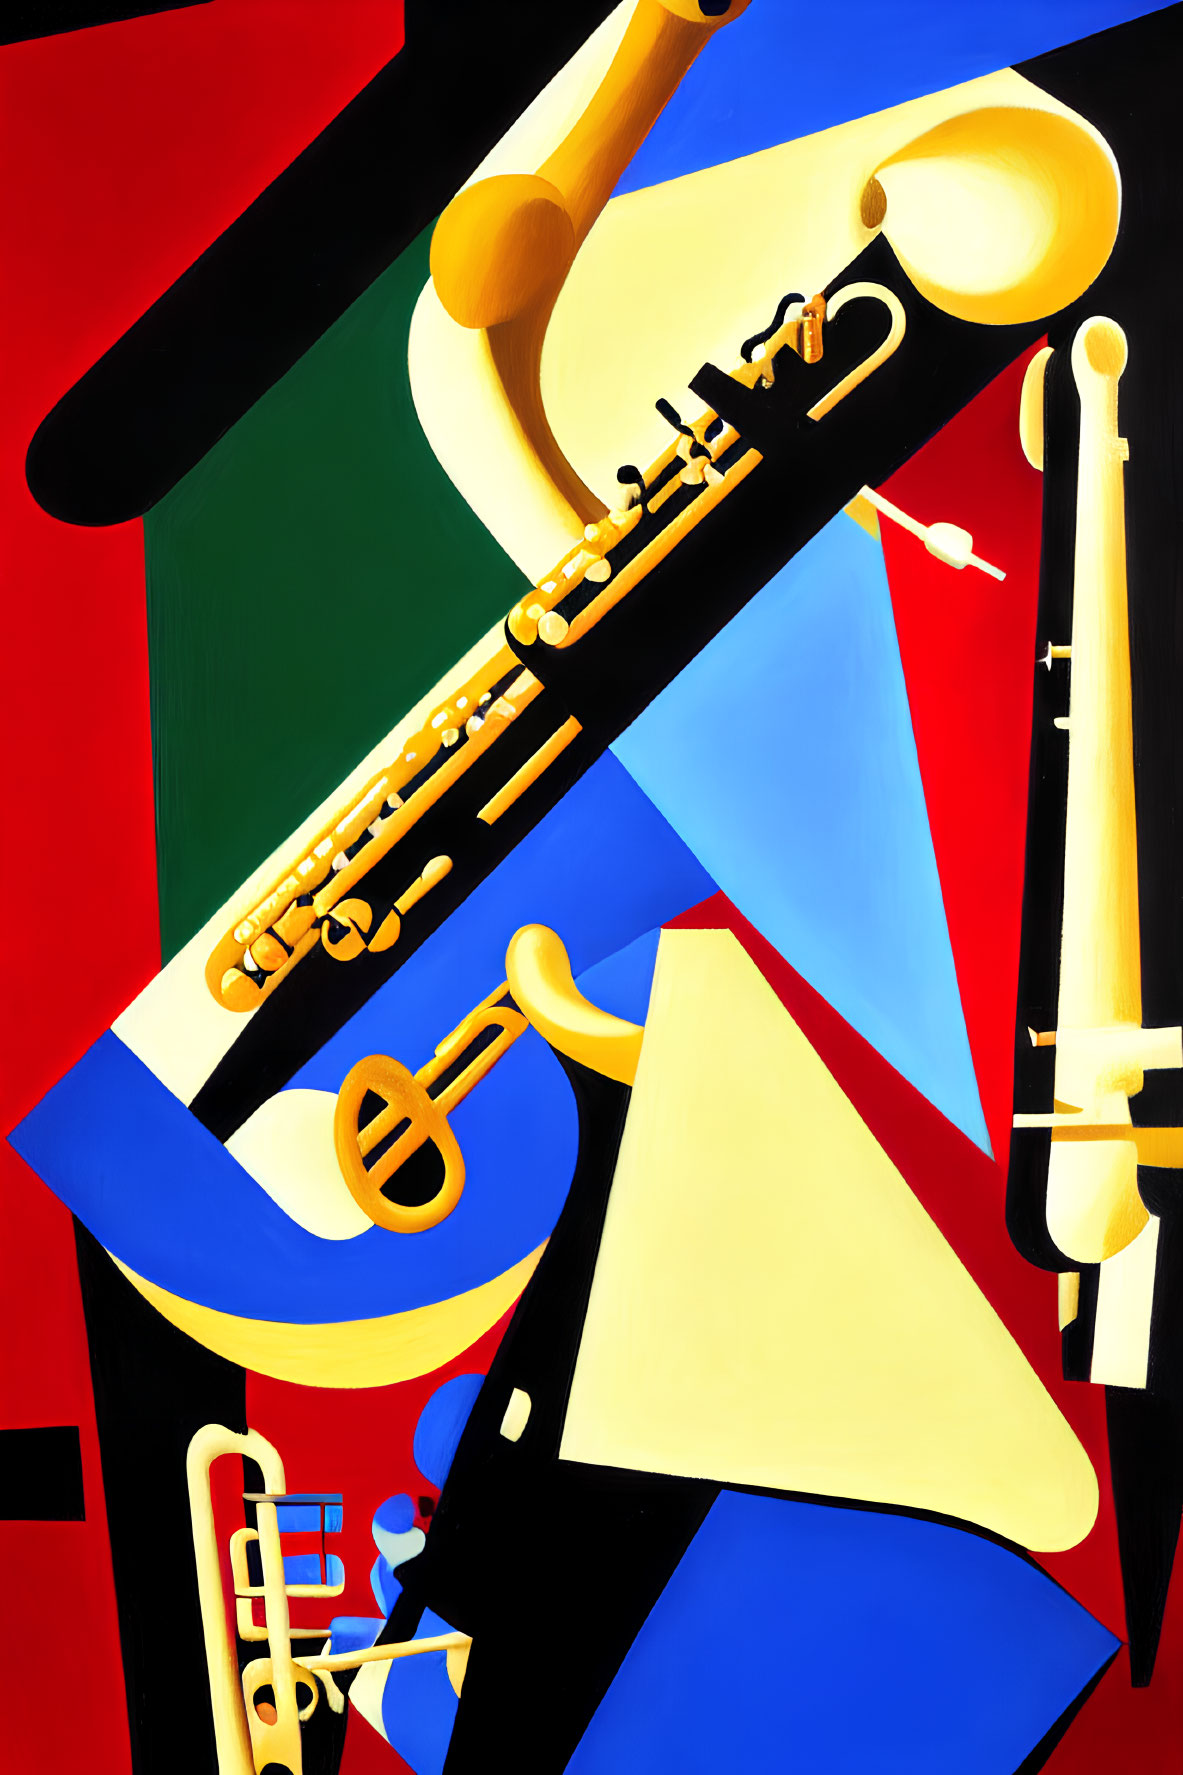 Colorful Abstract Painting with Geometric Shapes and Brass Instruments on Red Background